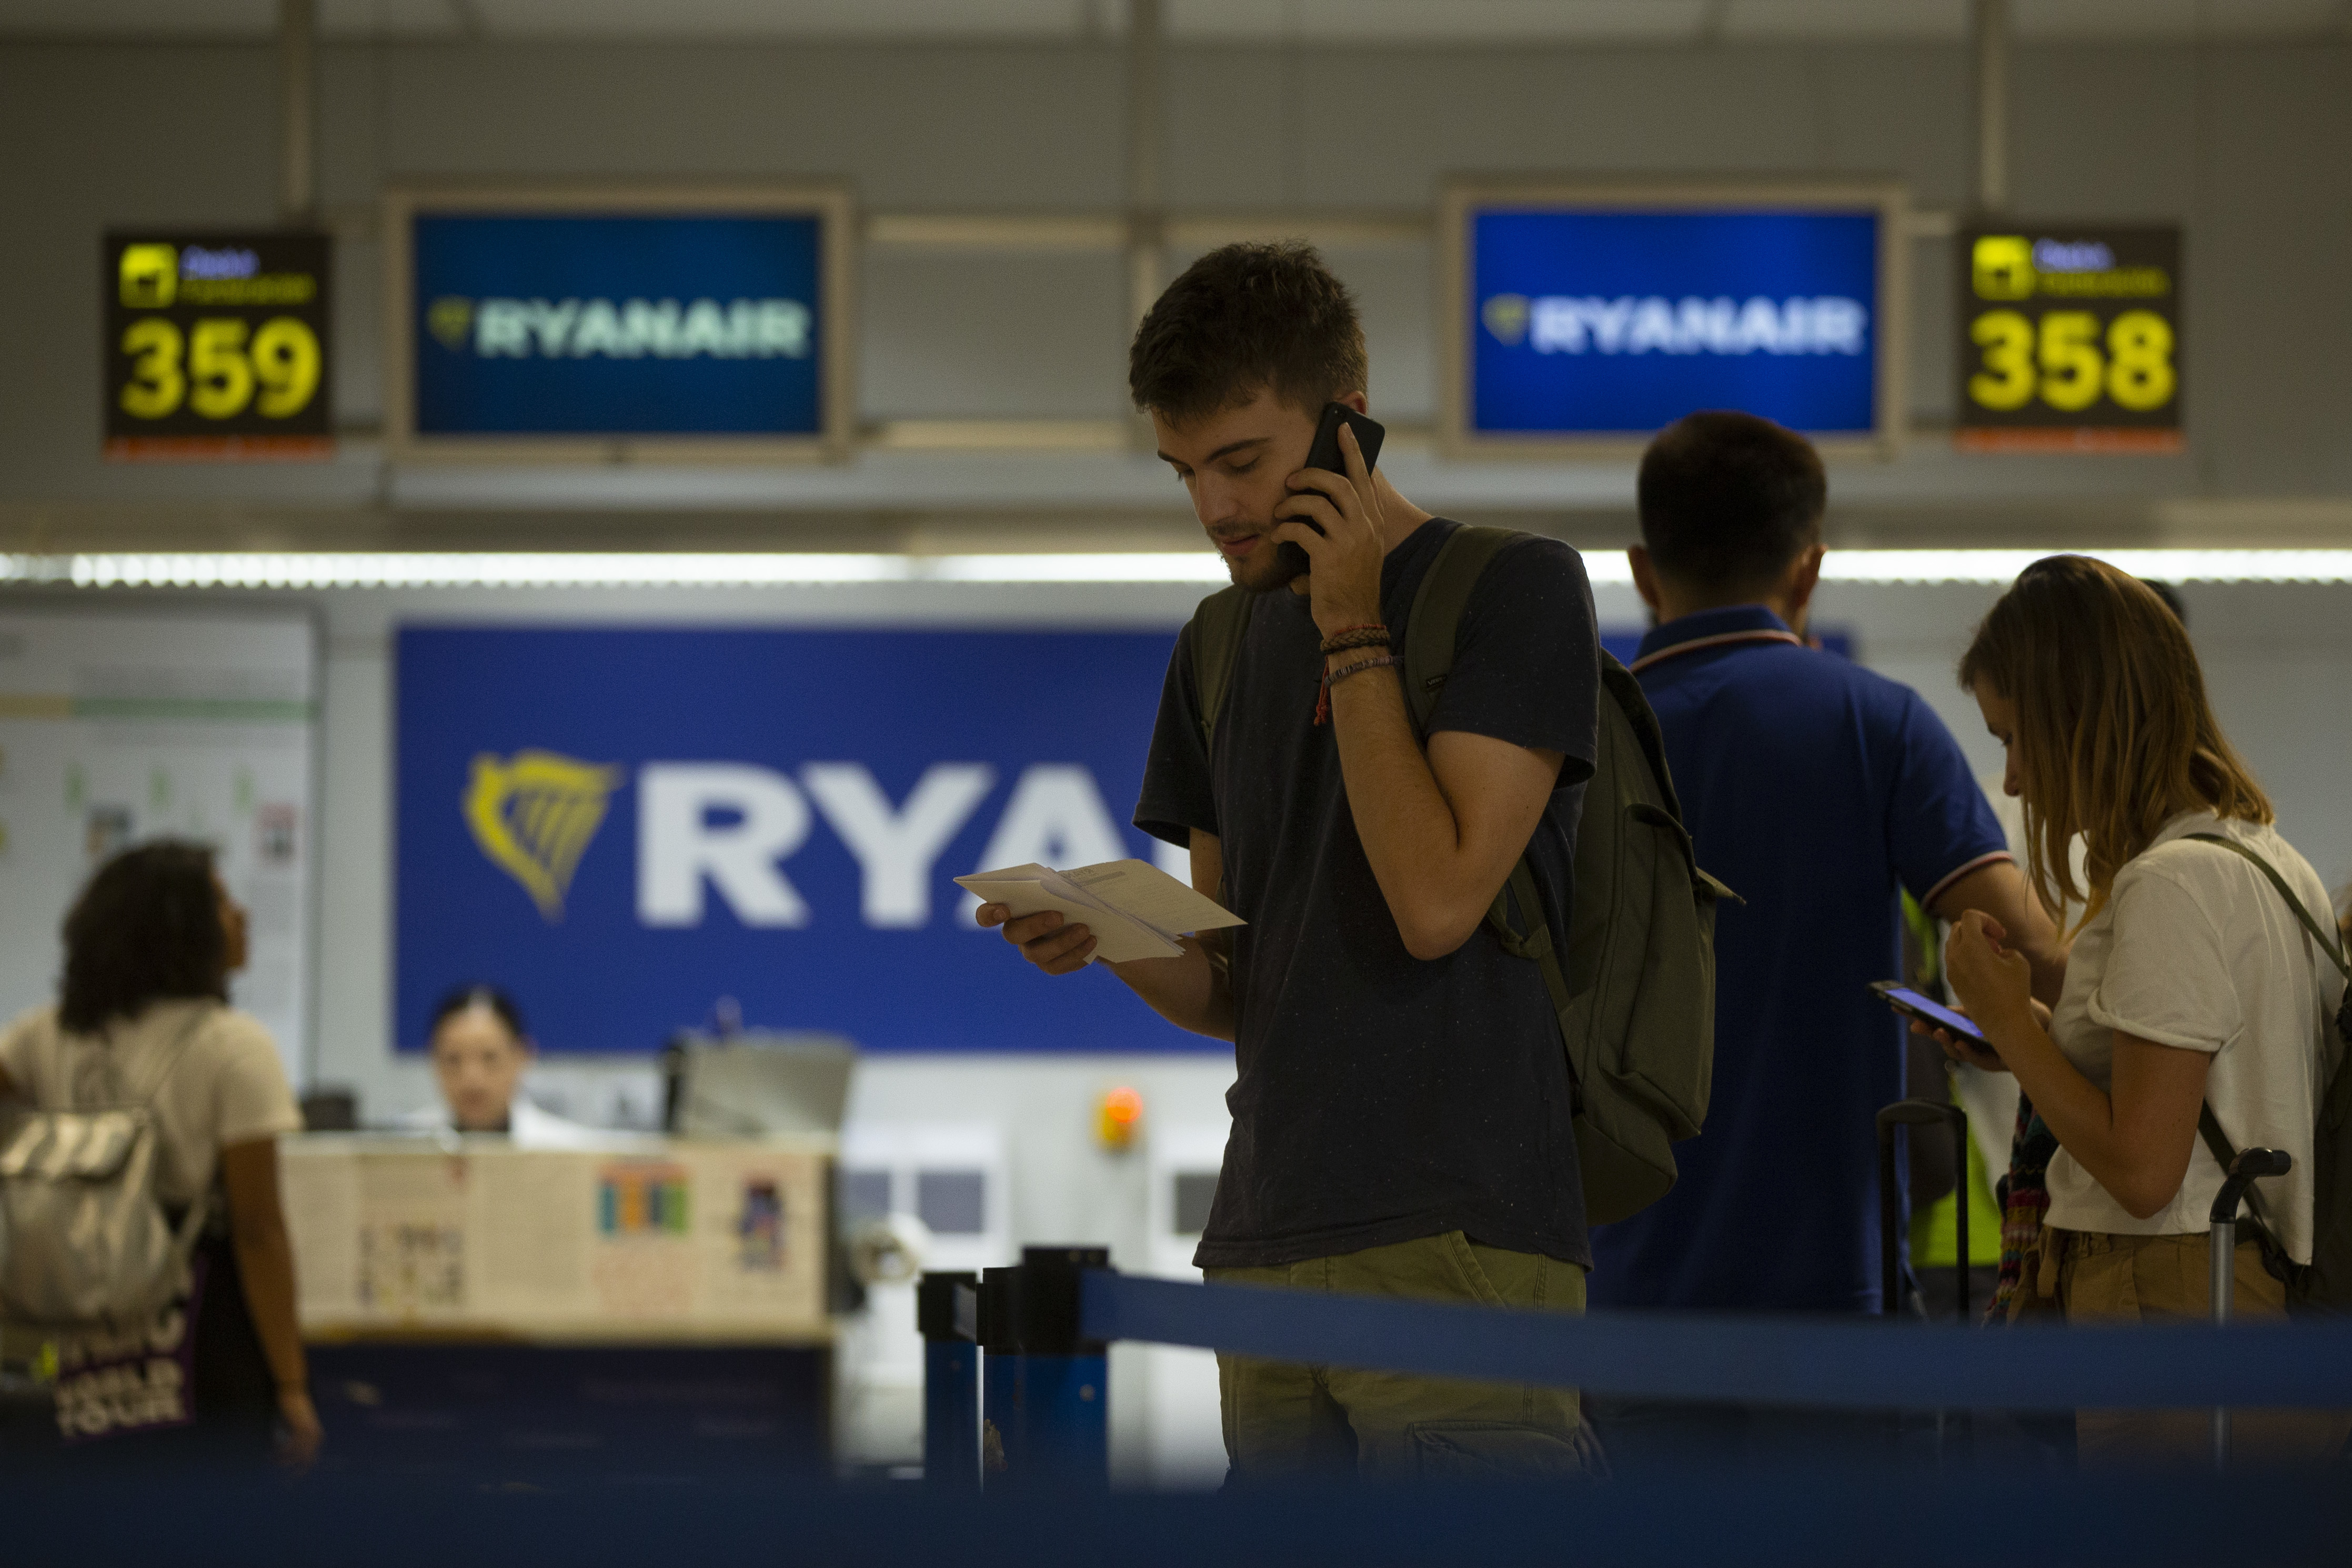 People queue at the Ryanair check-in desk during the first of two days cabin crew strike at Adolfo Suarez-Barajas international airport in Madrid, Wednesday, July 25, 2018. Cabin crew workers for low-cost airline Ryanair went on strike in four European countries over working conditions, forcing thousands of passengers to make last-minute travel adjustments at the peak of the summer holiday season. (AP Photo/Francisco Seco)